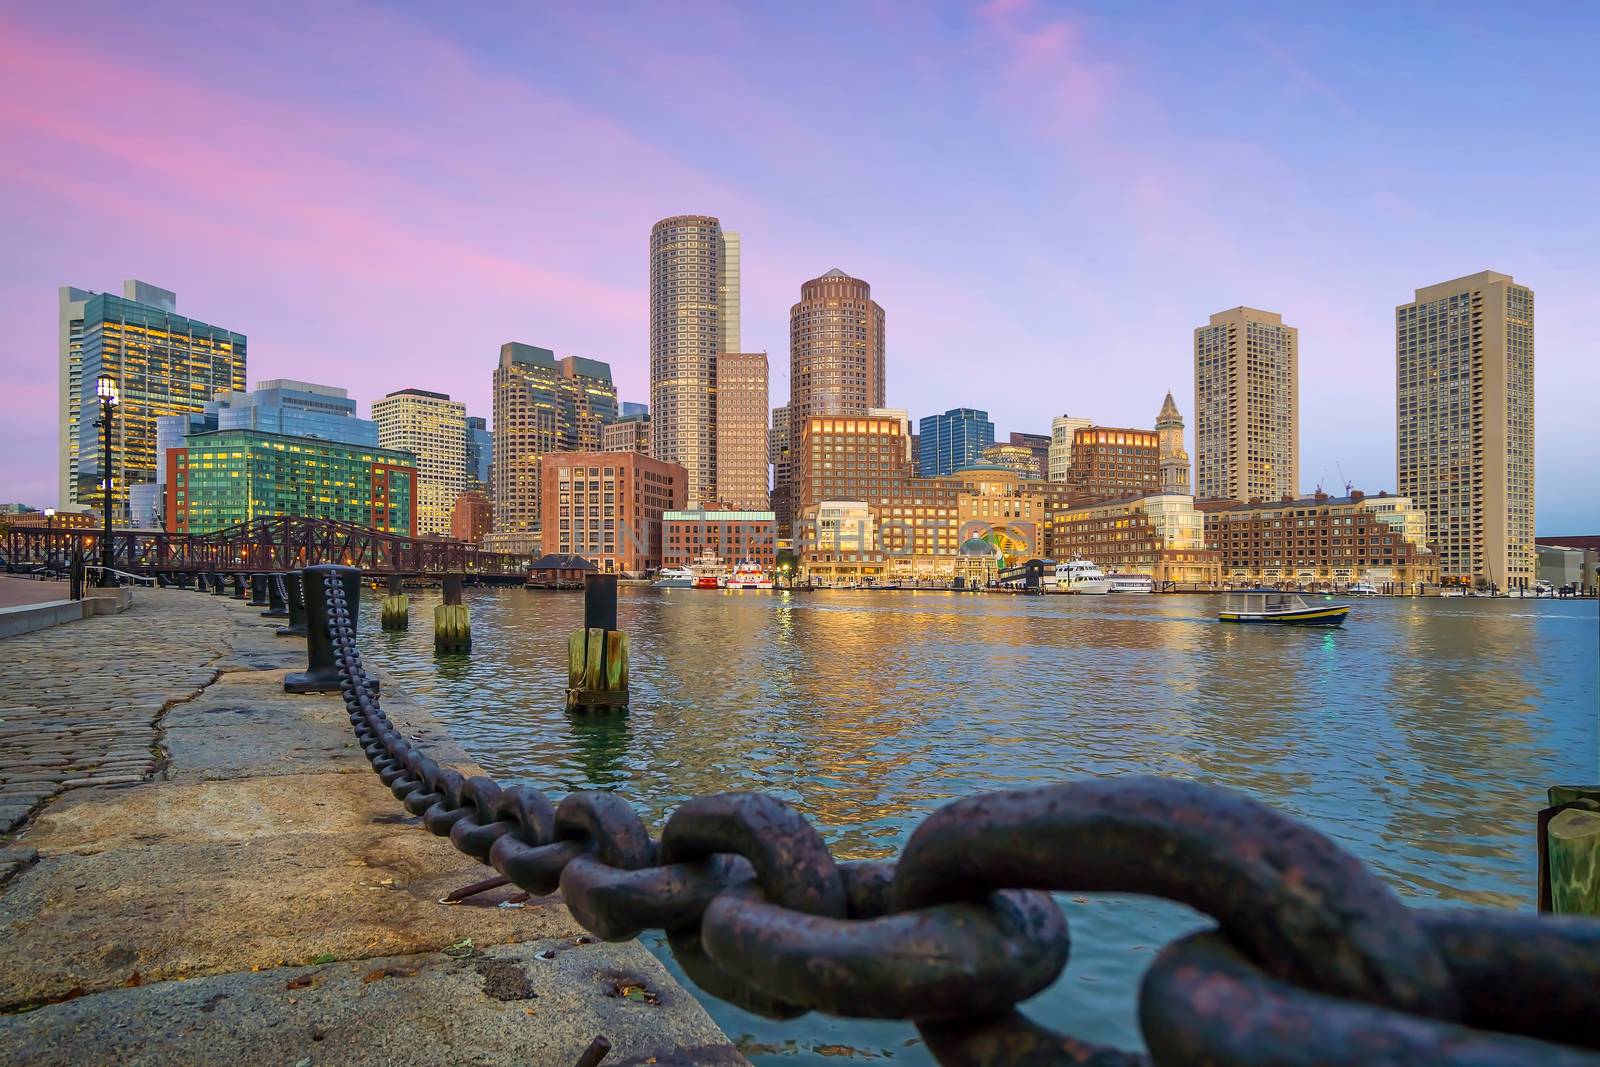 Boston Harbor and Financial District at twilight, Massachusetts  by f11photo